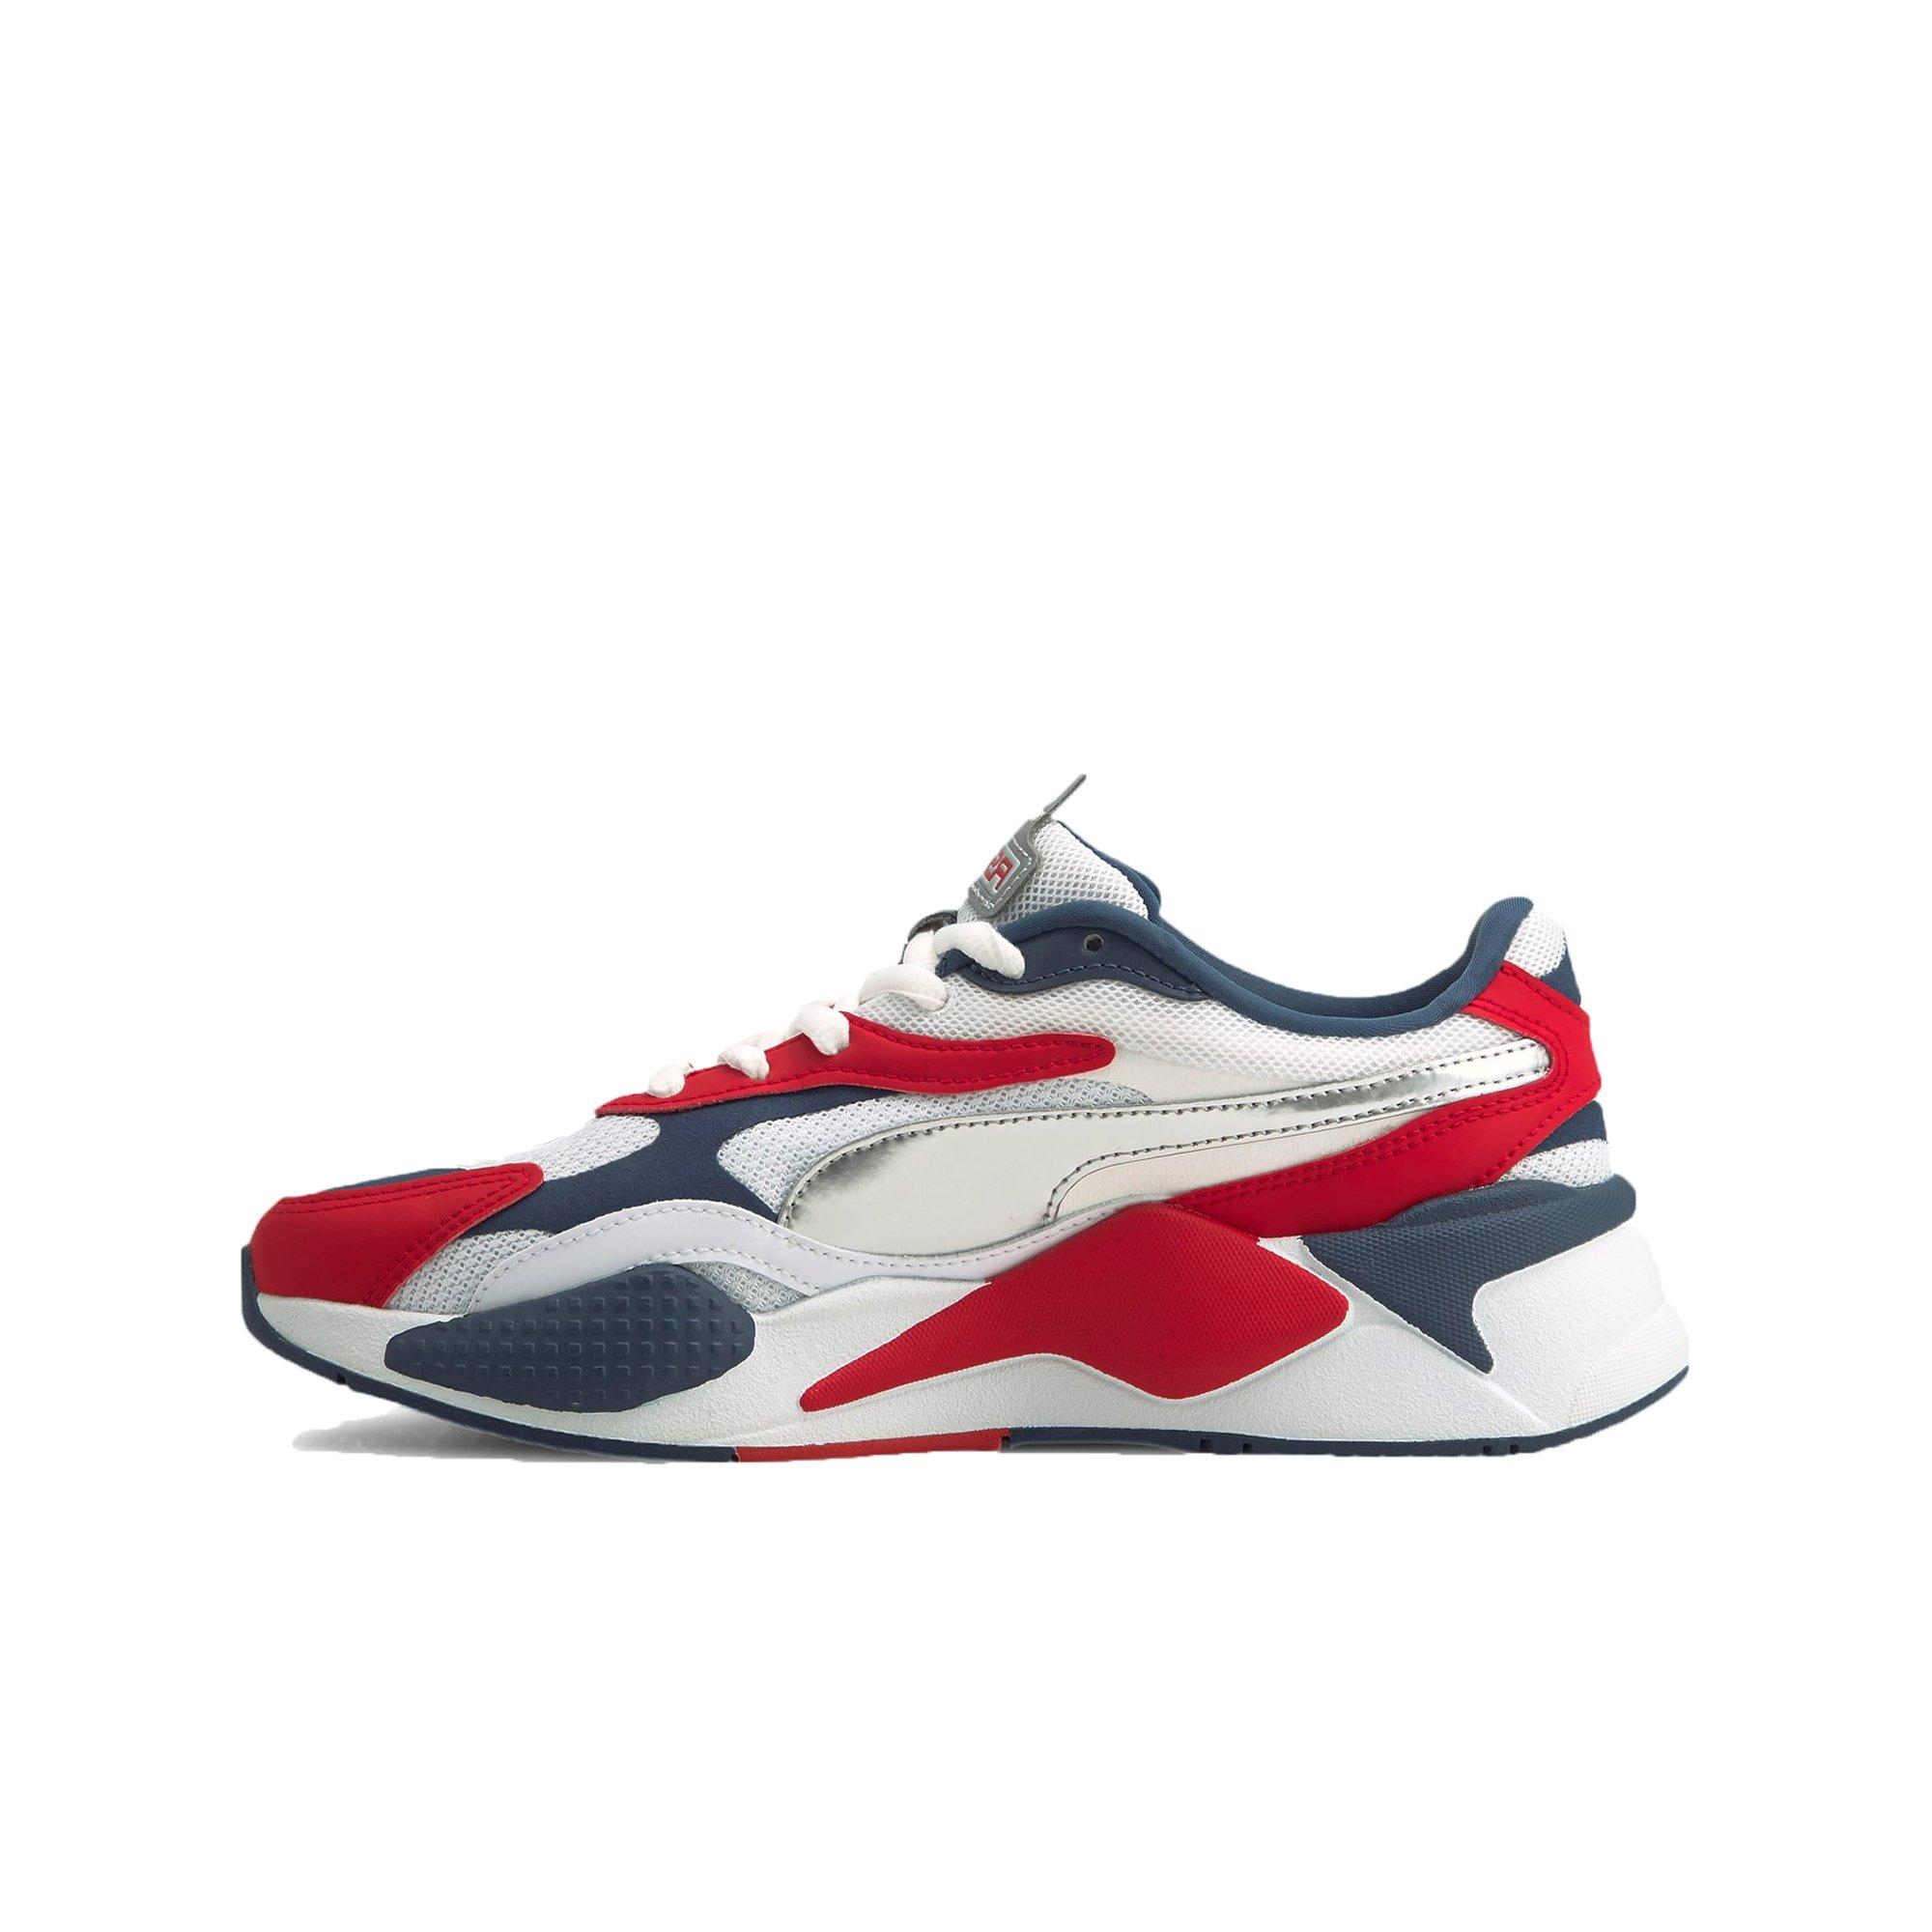 puma shoes red white and blue